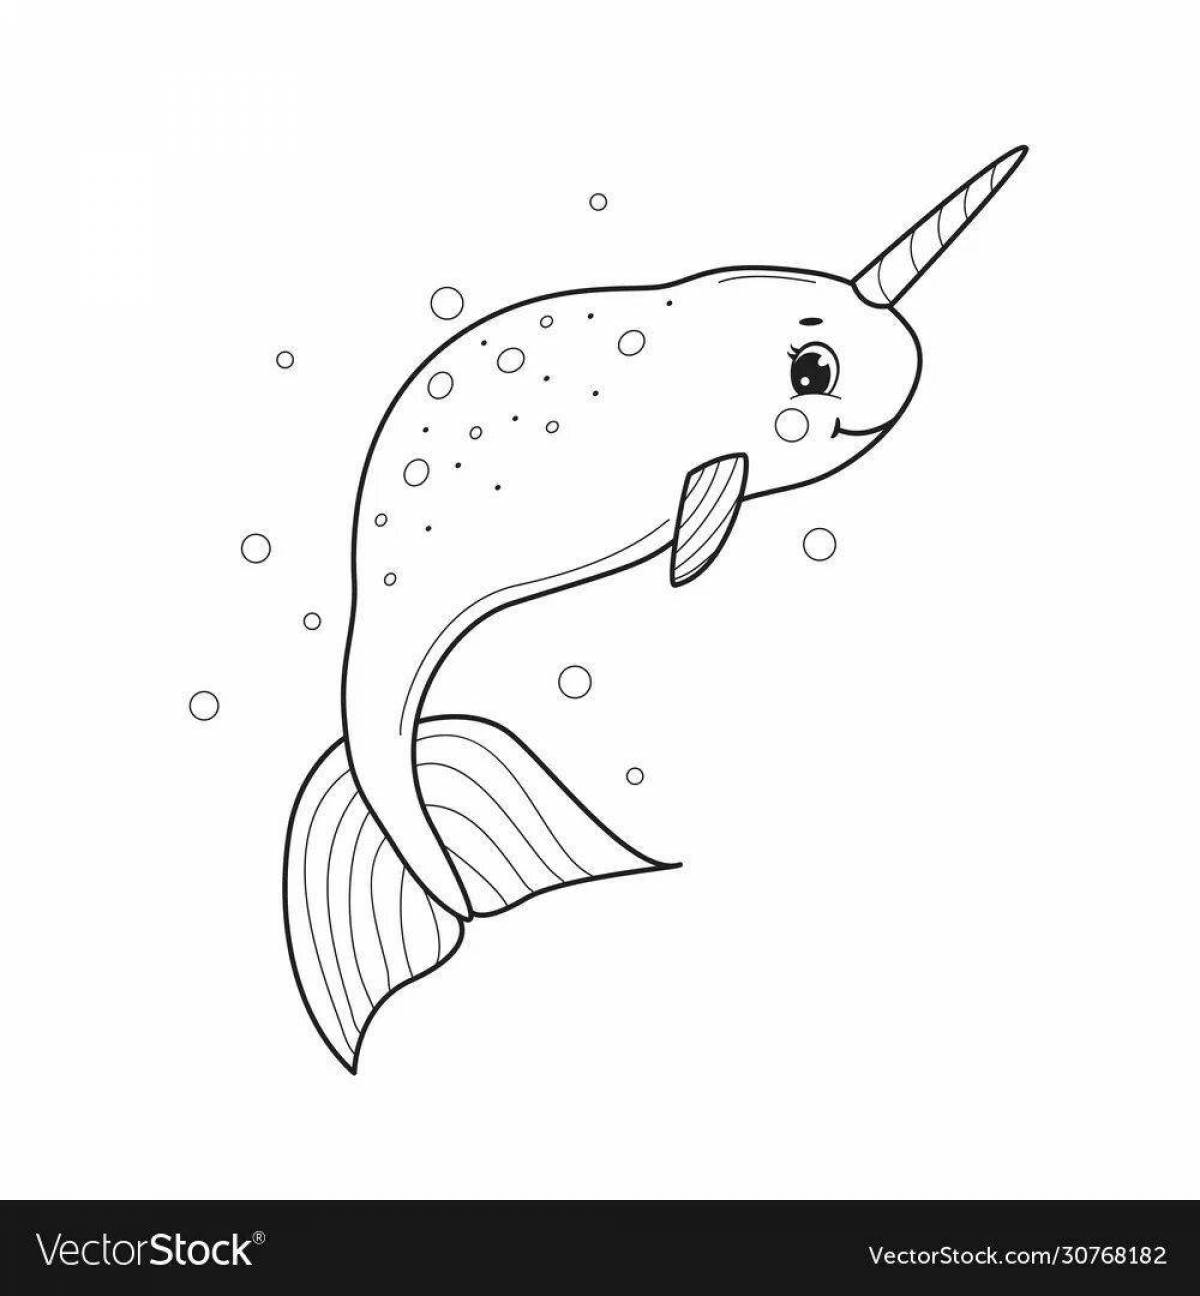 Outstanding narwhal coloring book for kids